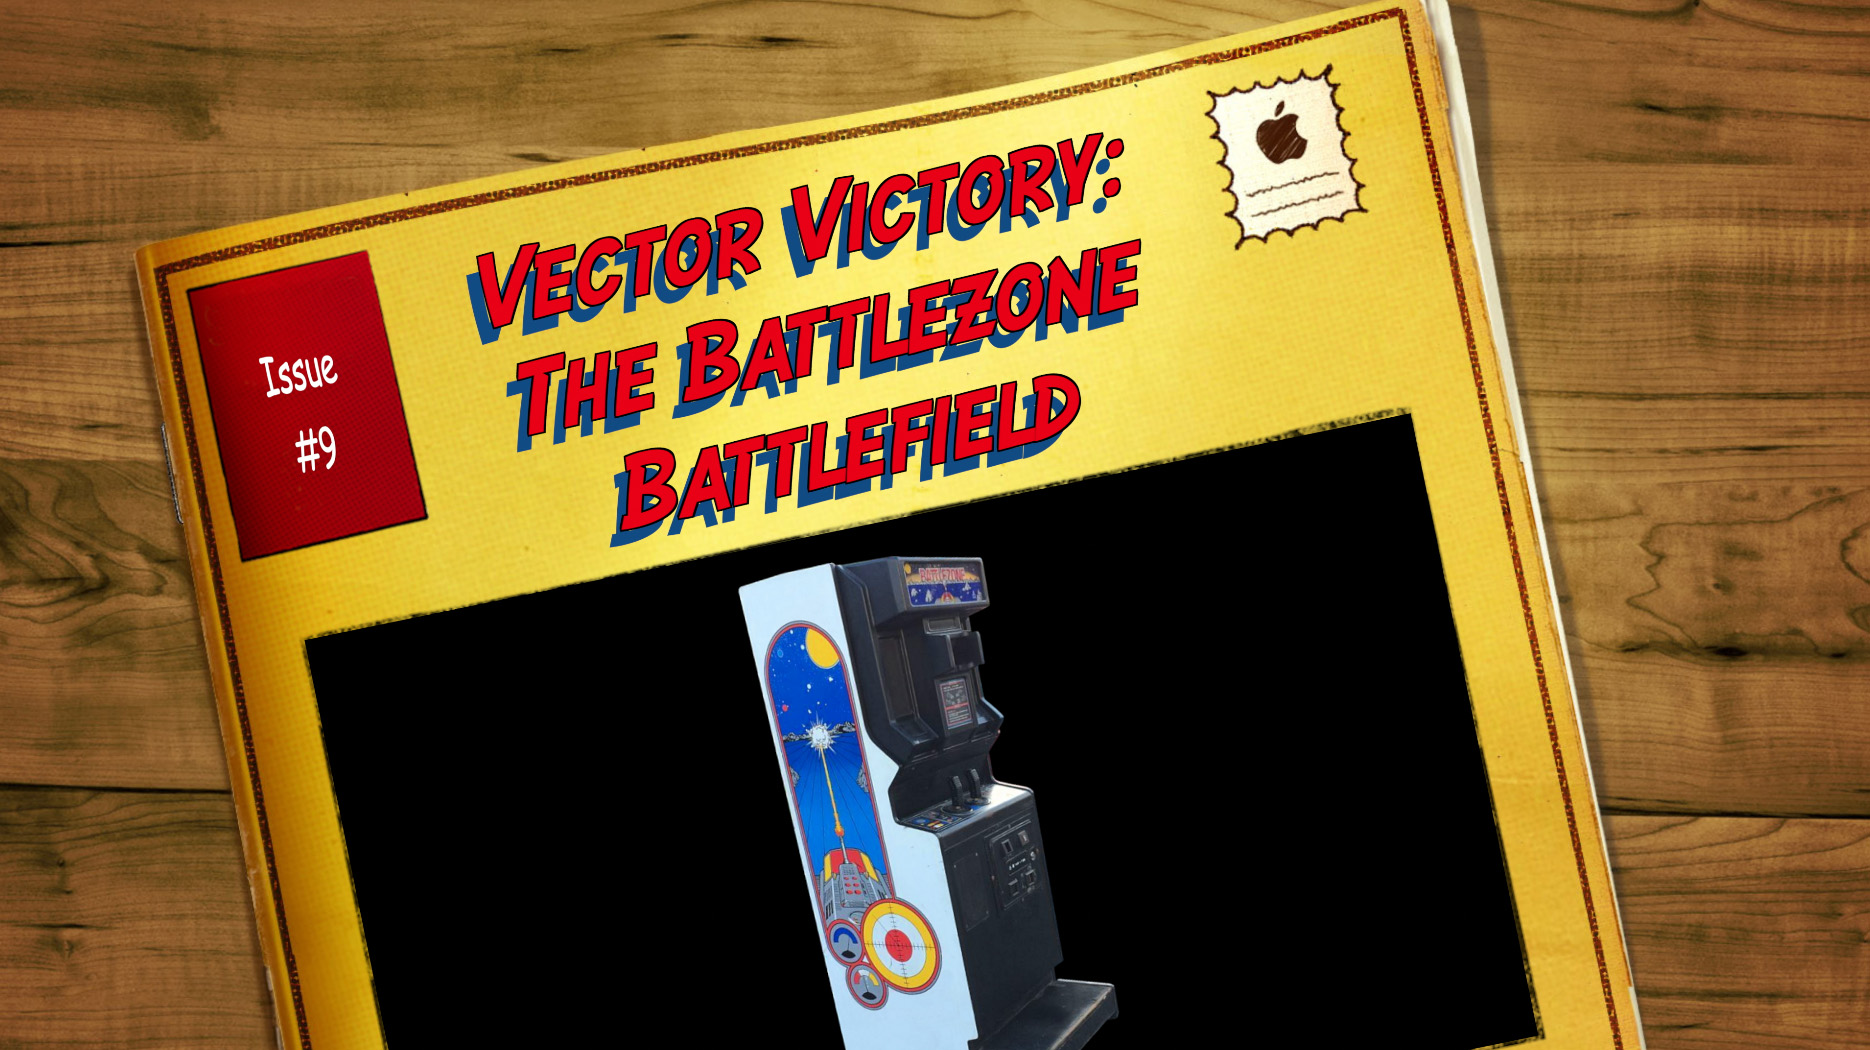 Issue #9 Vector Victory: The Battlezone Battlefield